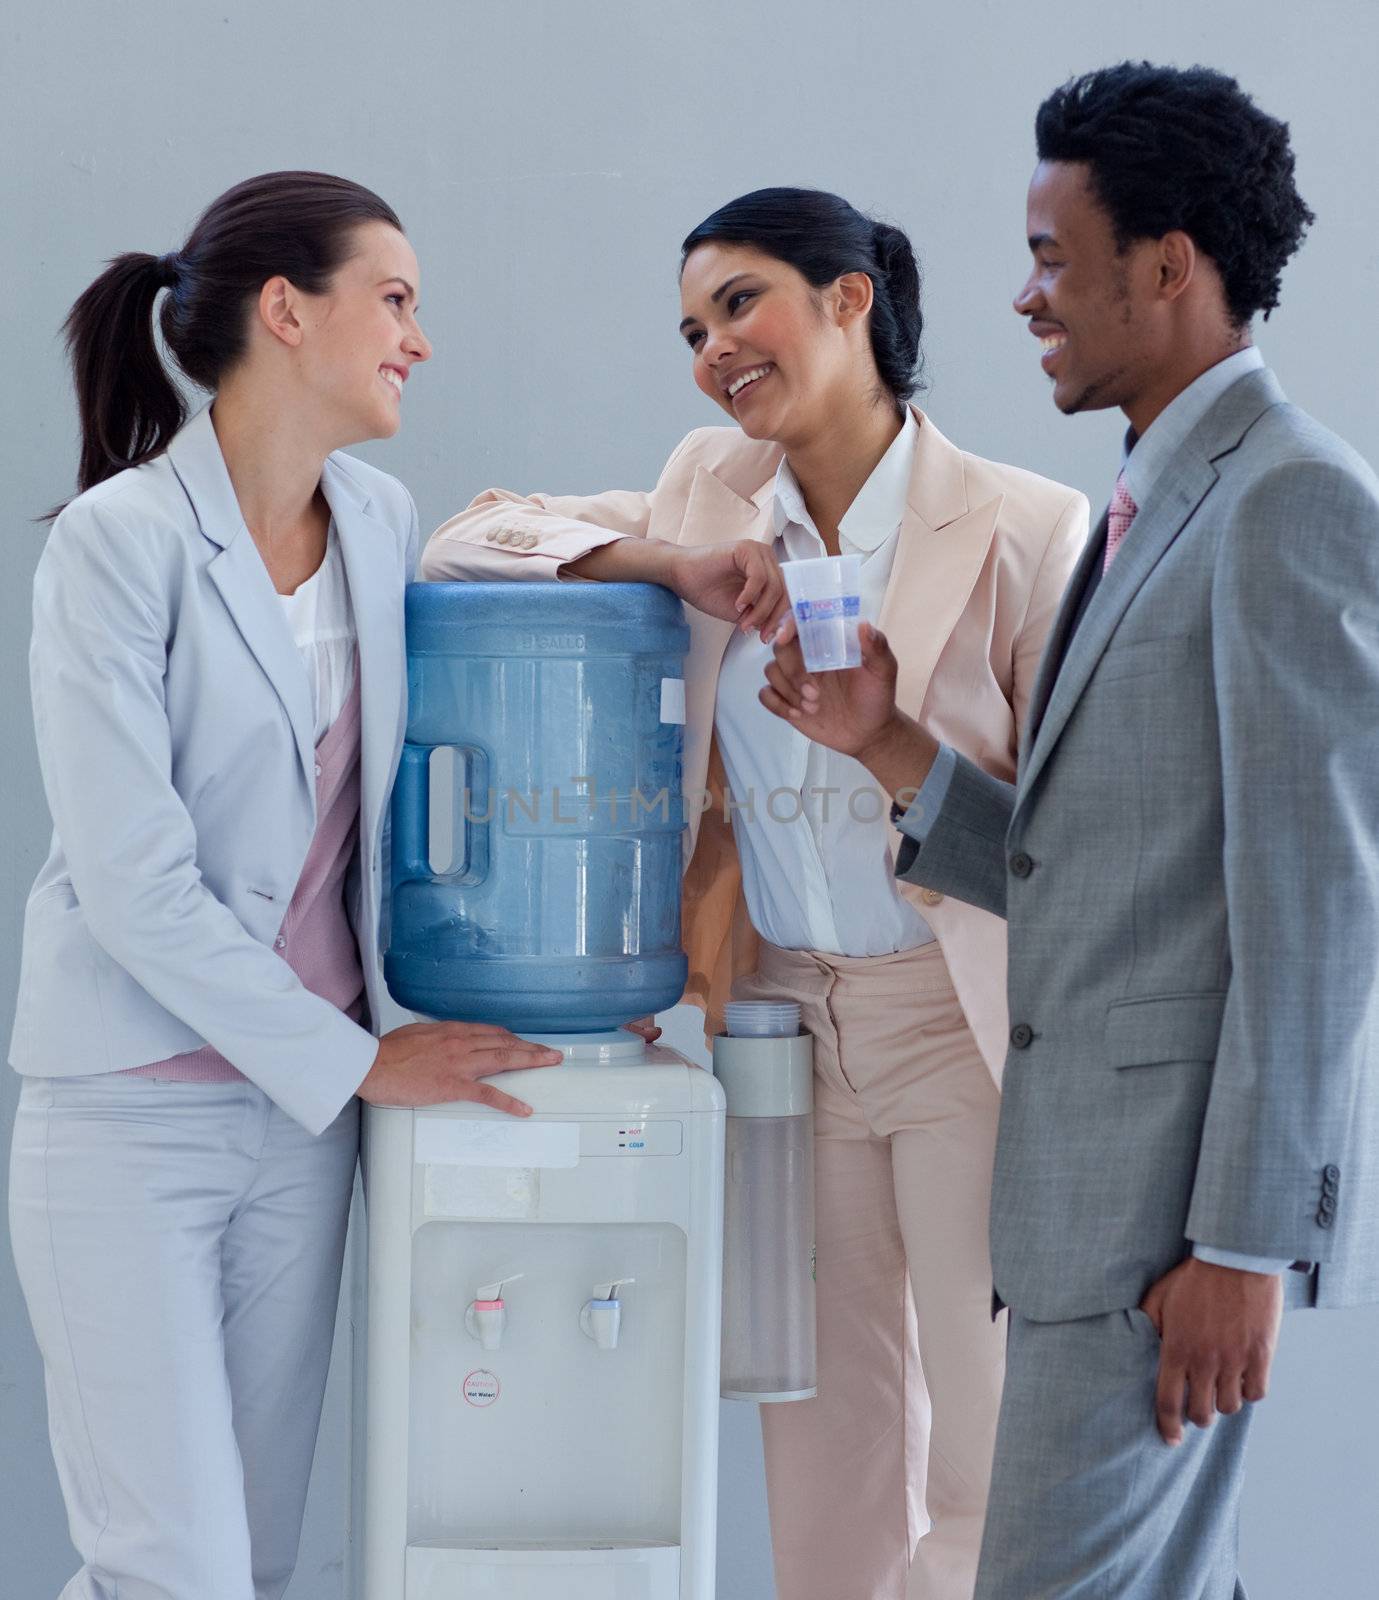 Business people speaking next to a water cooler by Wavebreakmedia